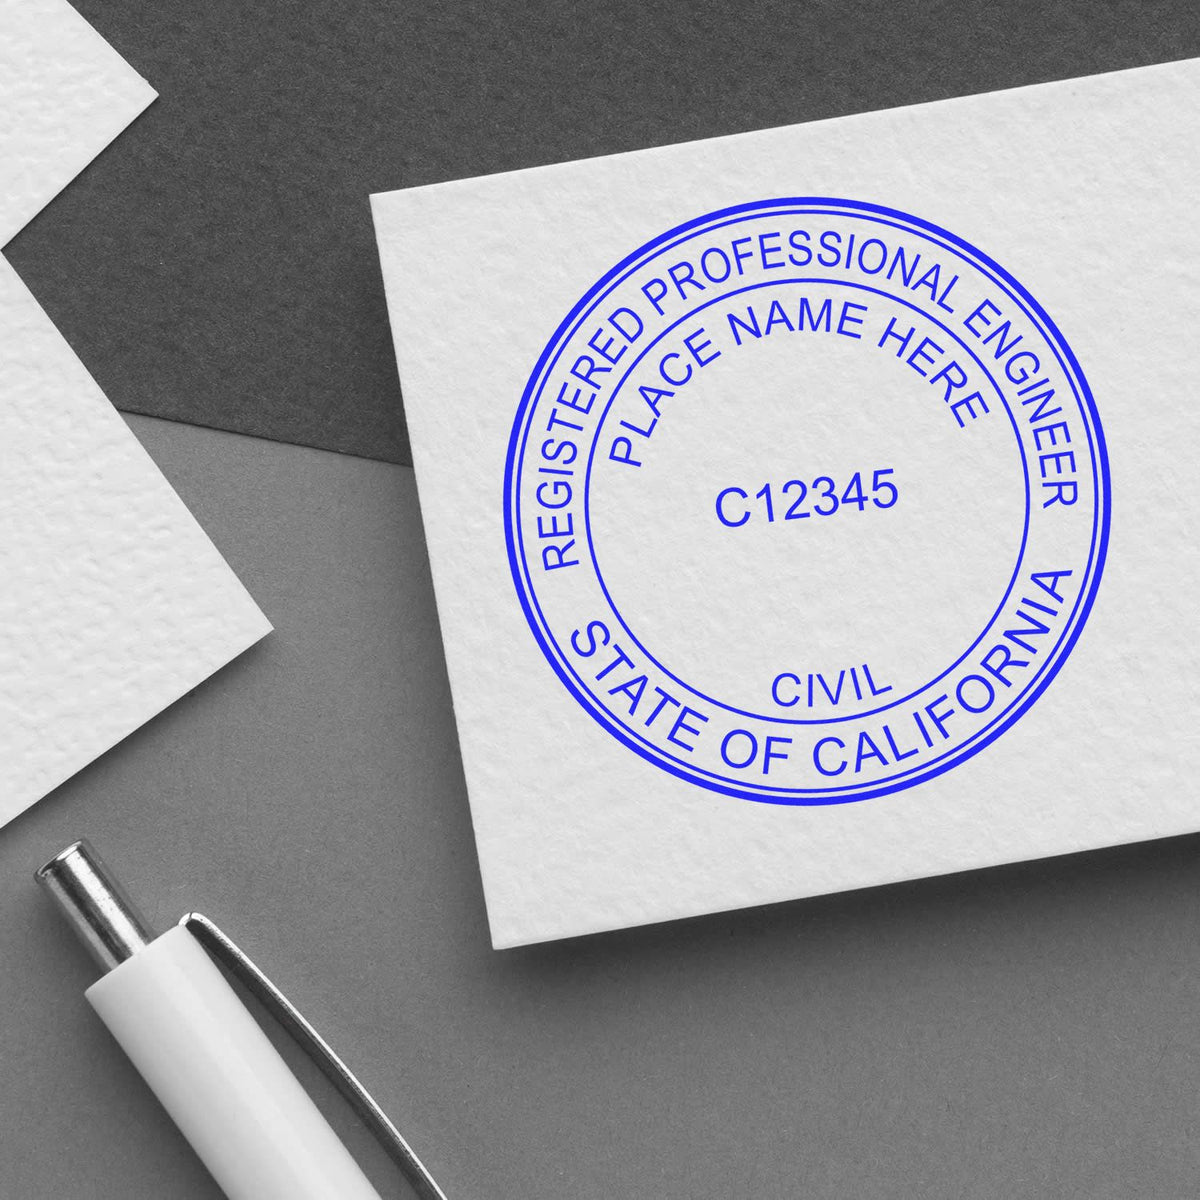 An alternative view of the California Professional Engineer Seal Stamp stamped on a sheet of paper showing the image in use